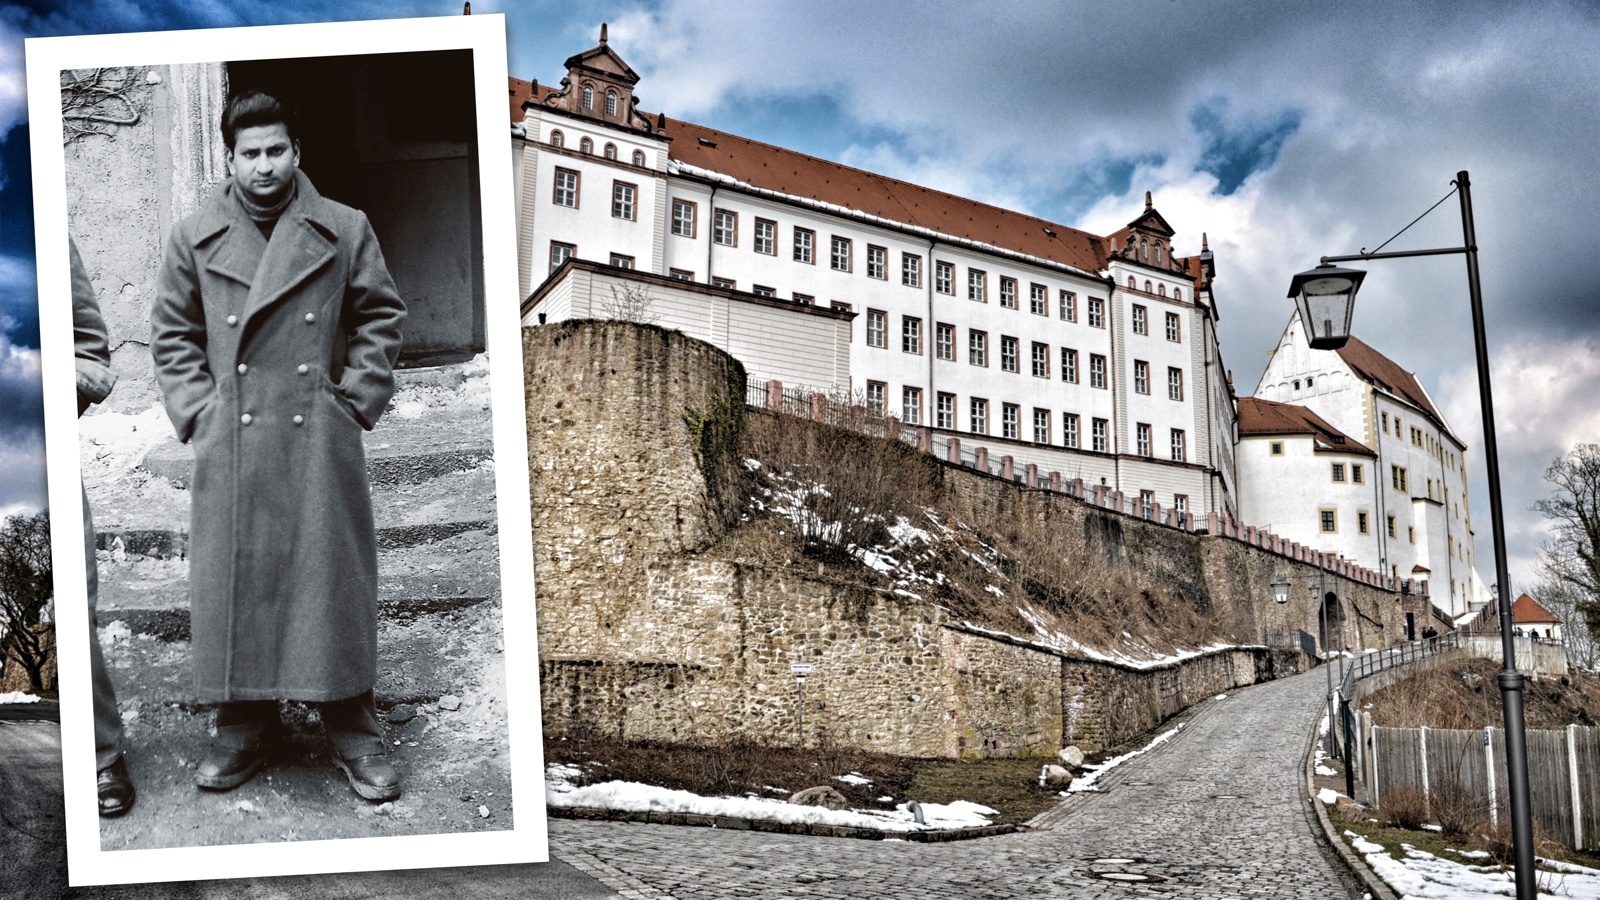 The story of the only Indian ever imprisoned in Colditz – and how he escaped the Nazis